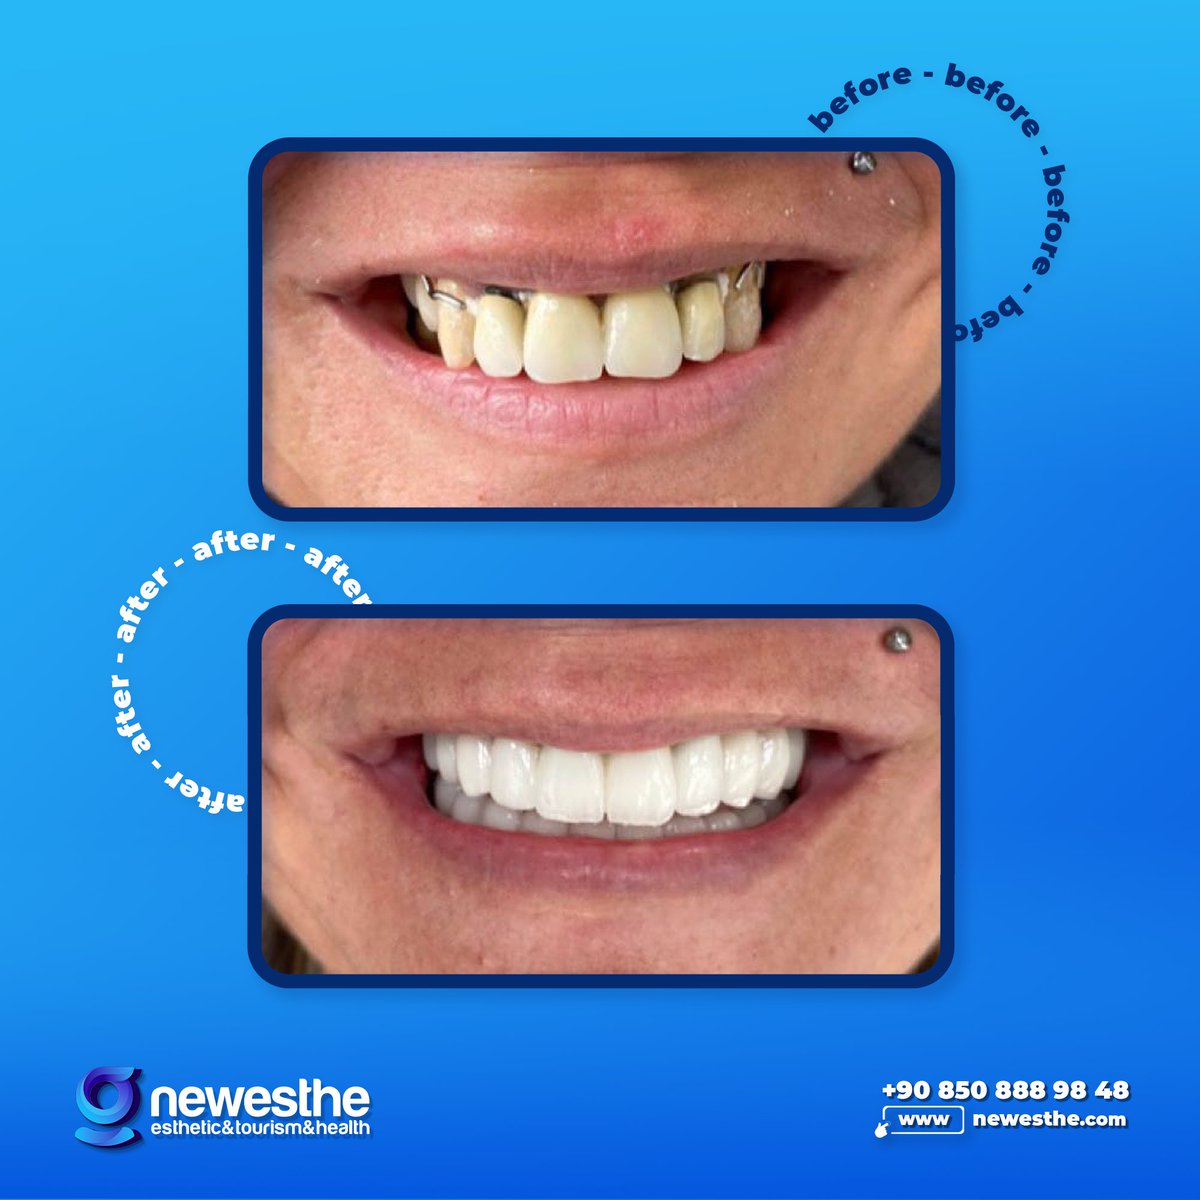 We redesigned the smile of our esteemed patient by applying 12 implants and emax zirconium coating to all teeth.

You can contact us for more information.

☎️ Whatsapp International :
+90 850 888 98 58
🌐 : newesthe.com

#laminateveneer #gumtreatment